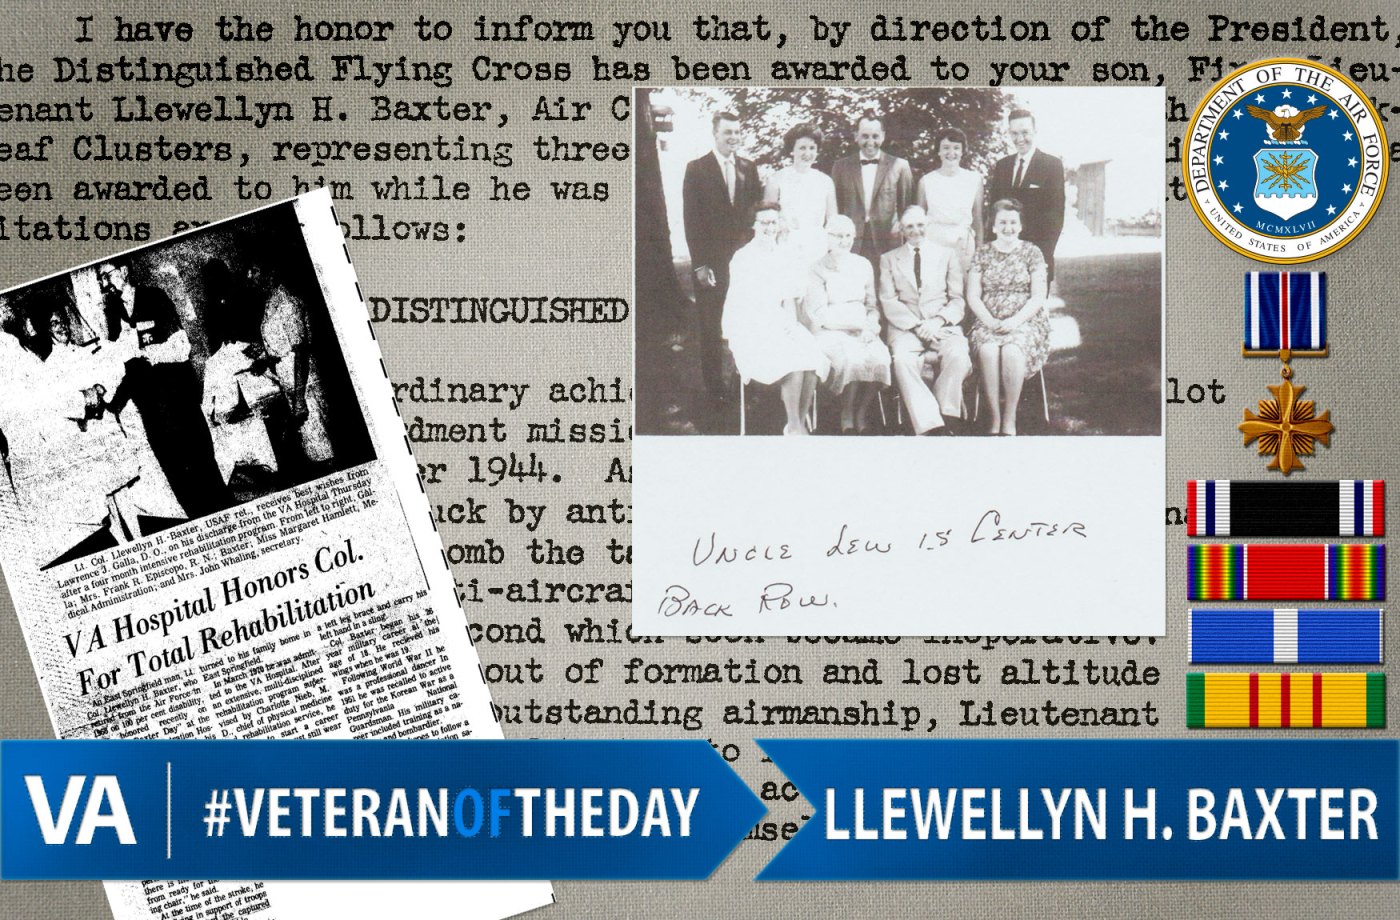 Llewellyn H. Baxter - Veteran of the Day